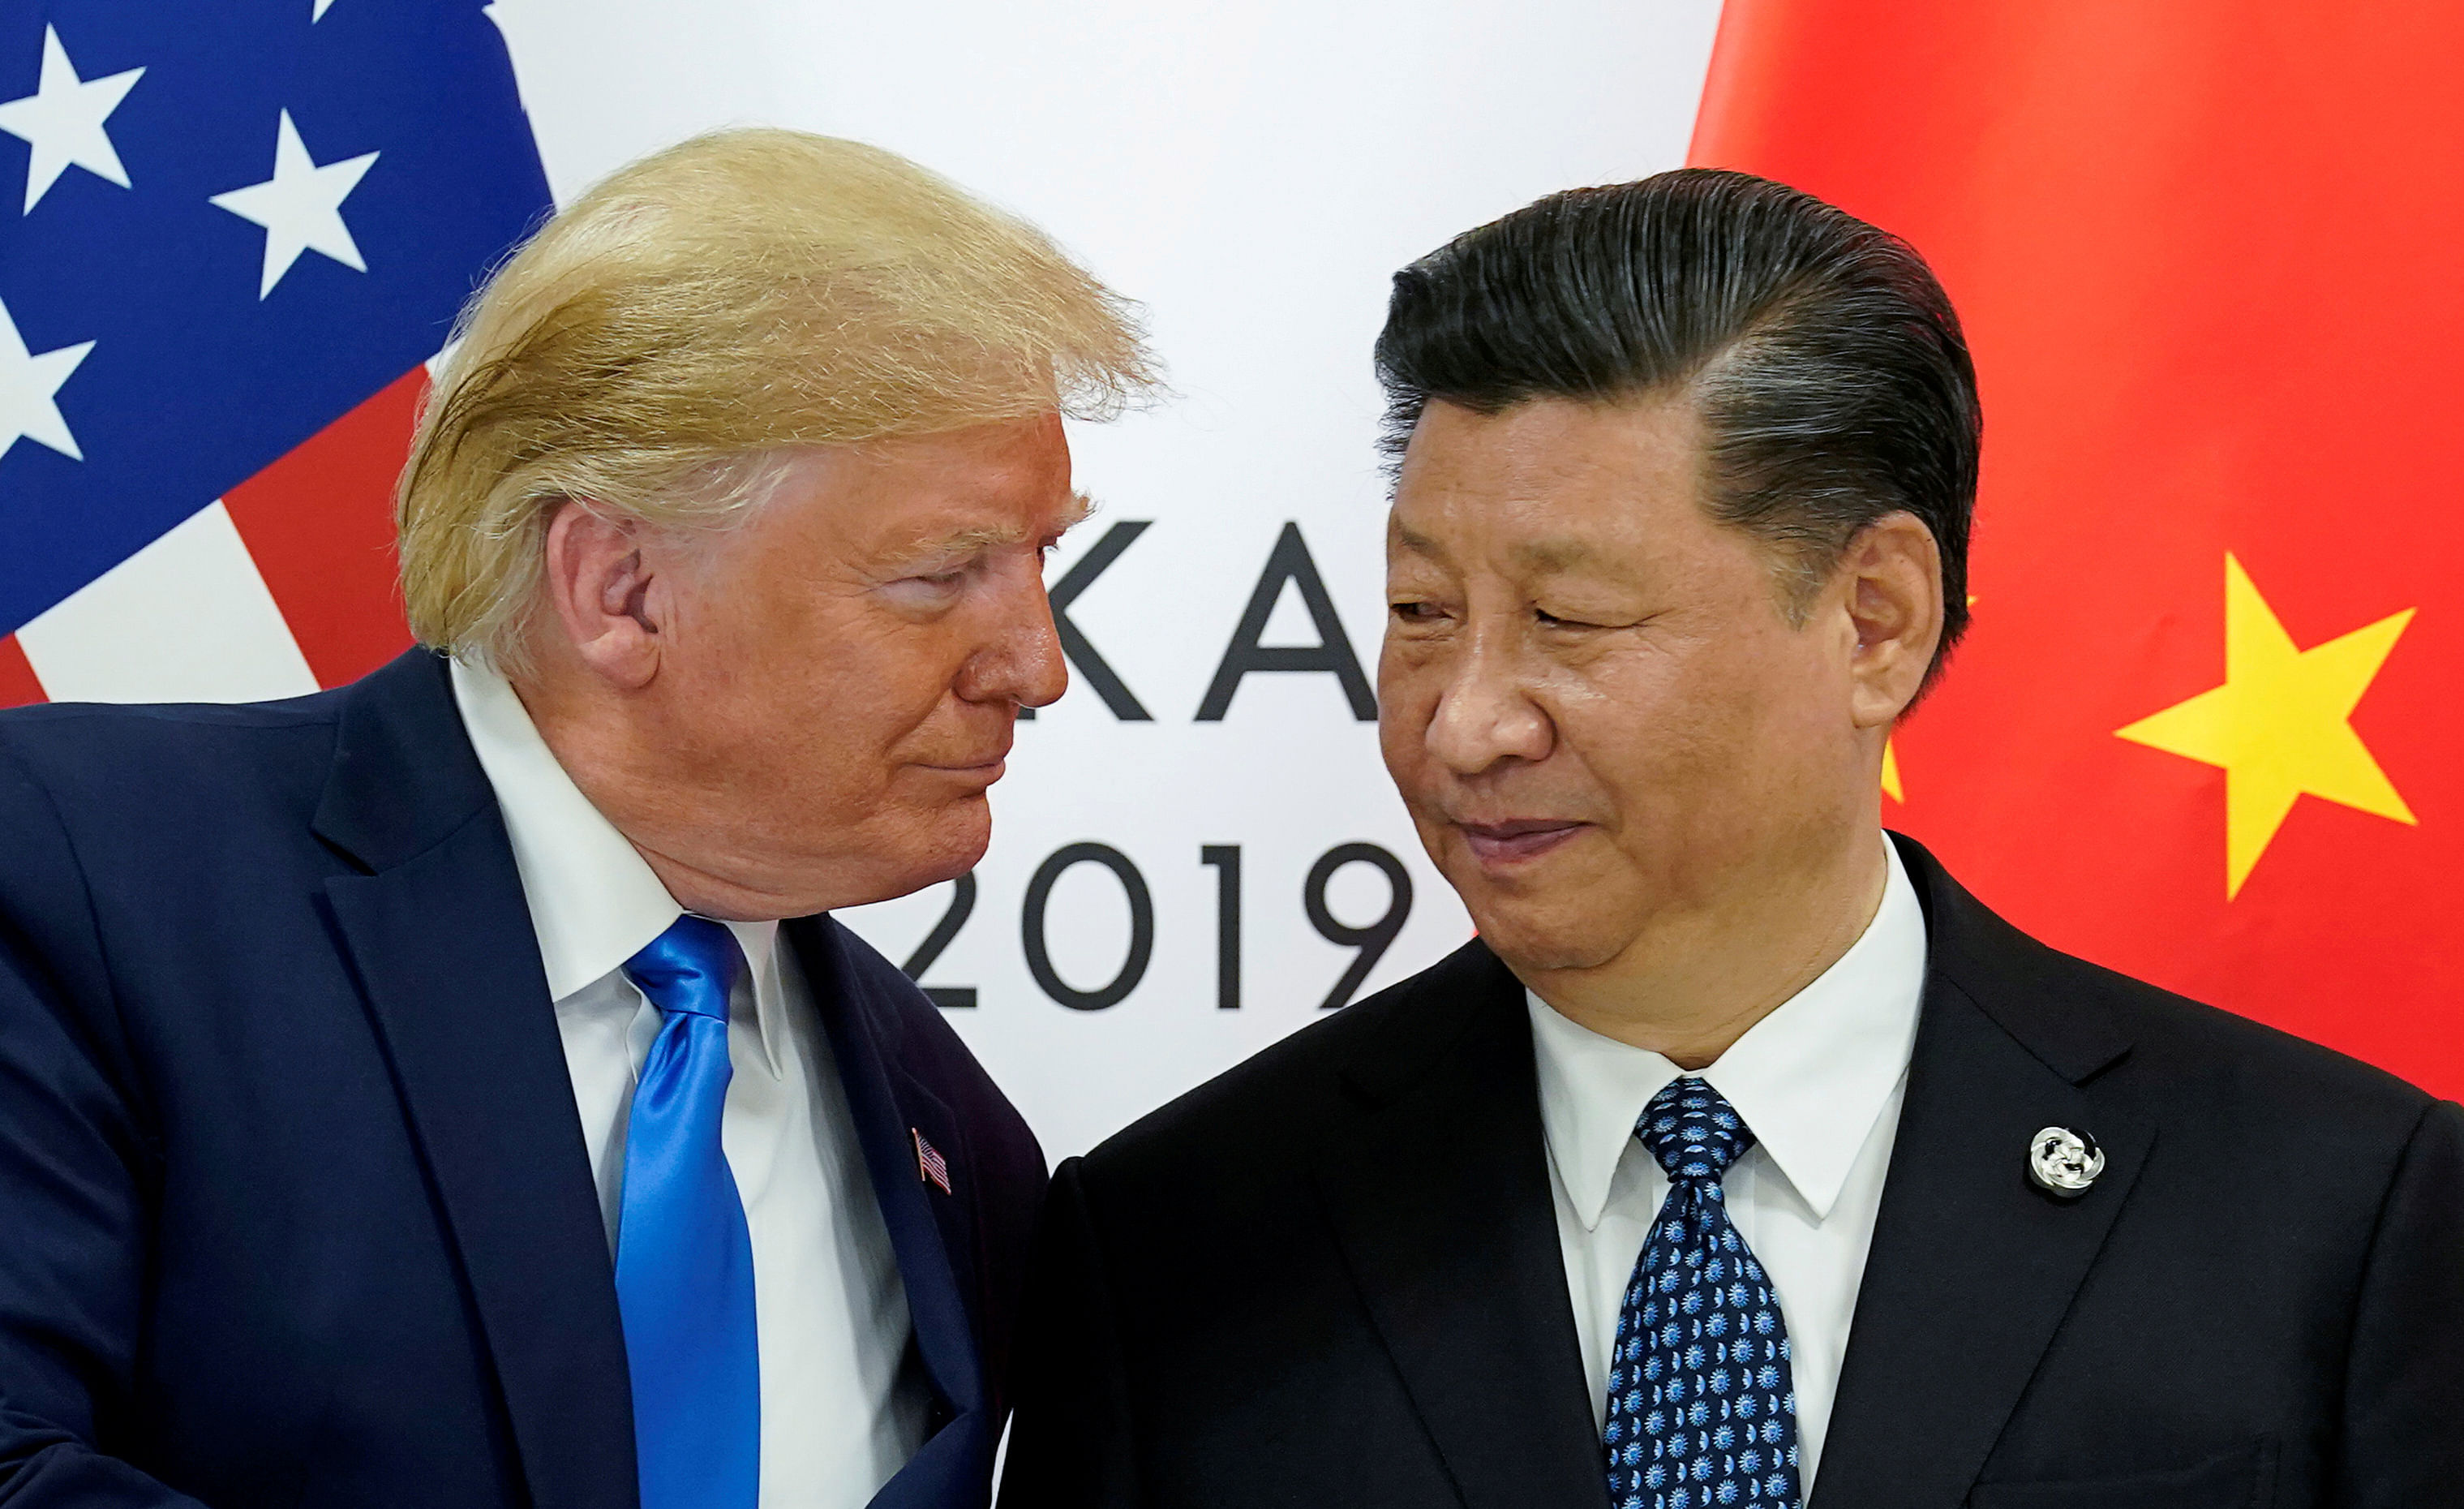 U.S. President Donald Trump meets with China's President Xi Jinping. (Reuters Photo)